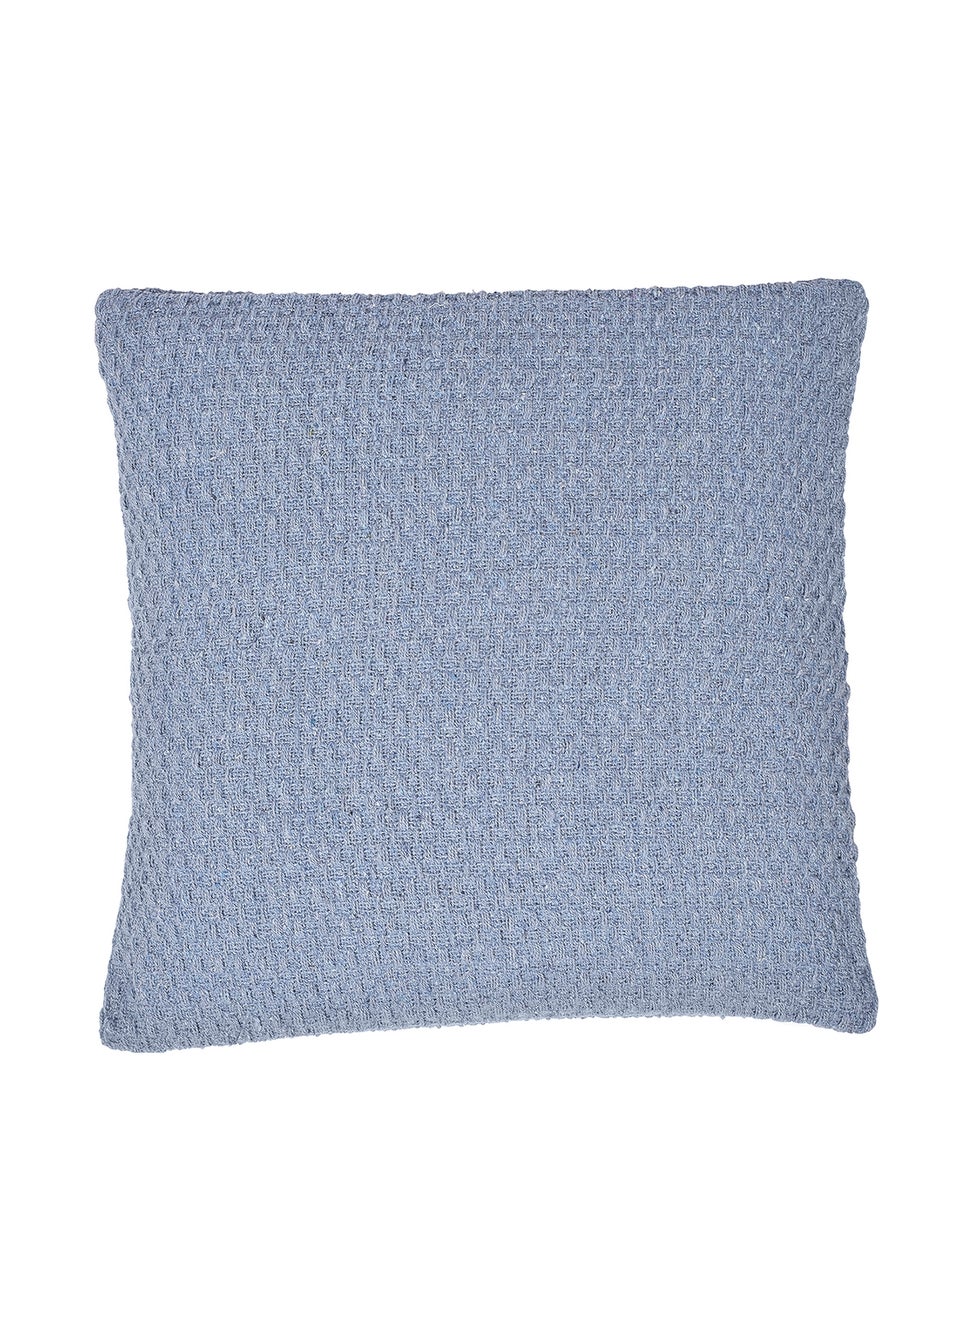 Drift Home Hayden Responsibly Sourced Filled Cushion